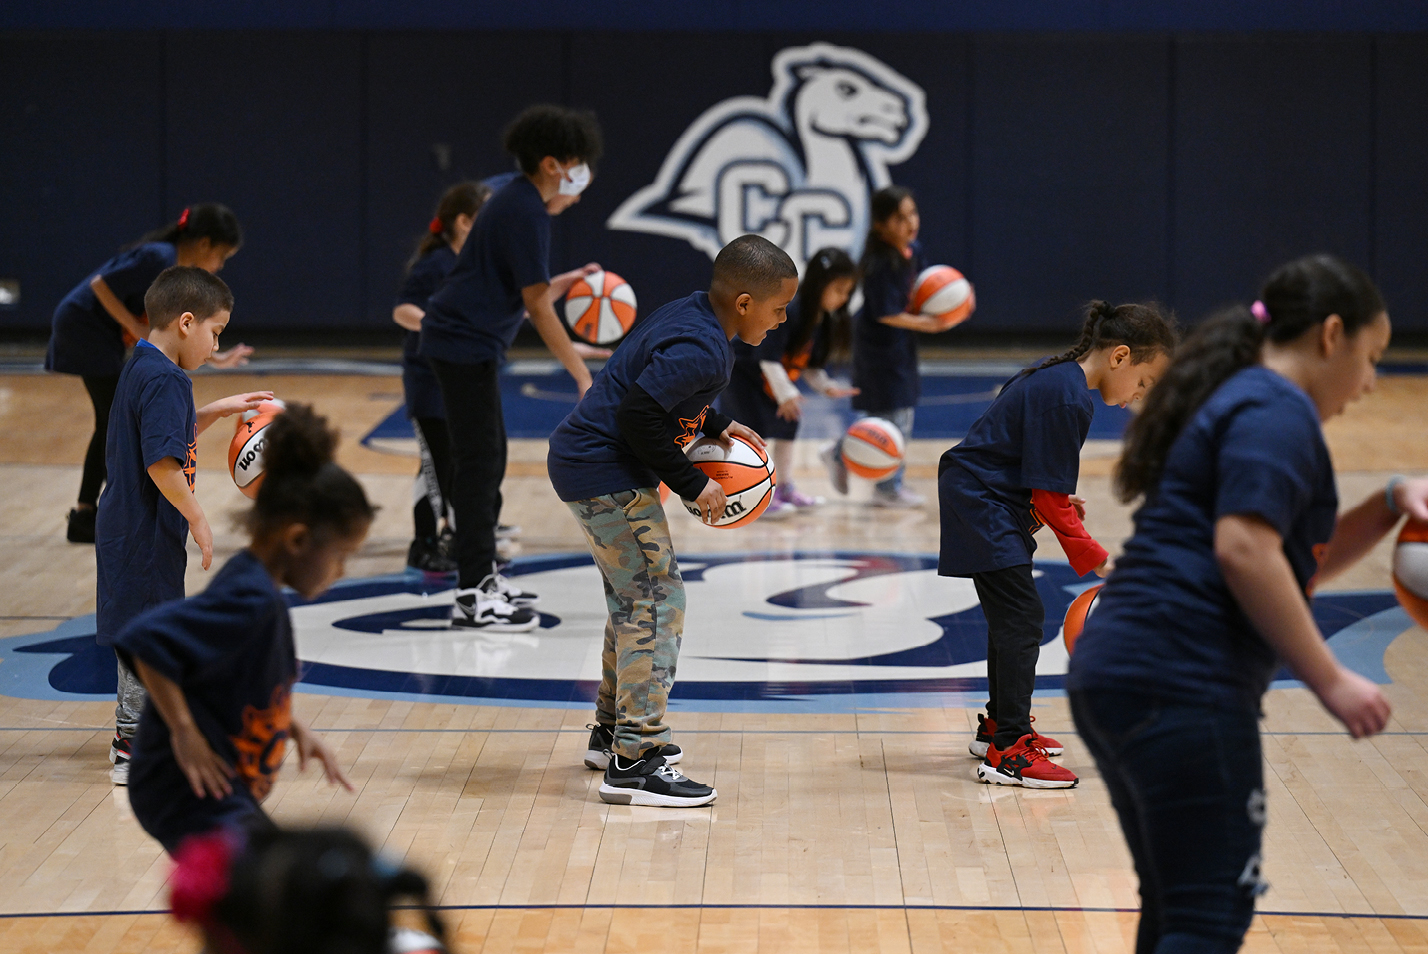 Children from the Salvation Army Boys and Girls Club of New London participate in a dribbling drill.